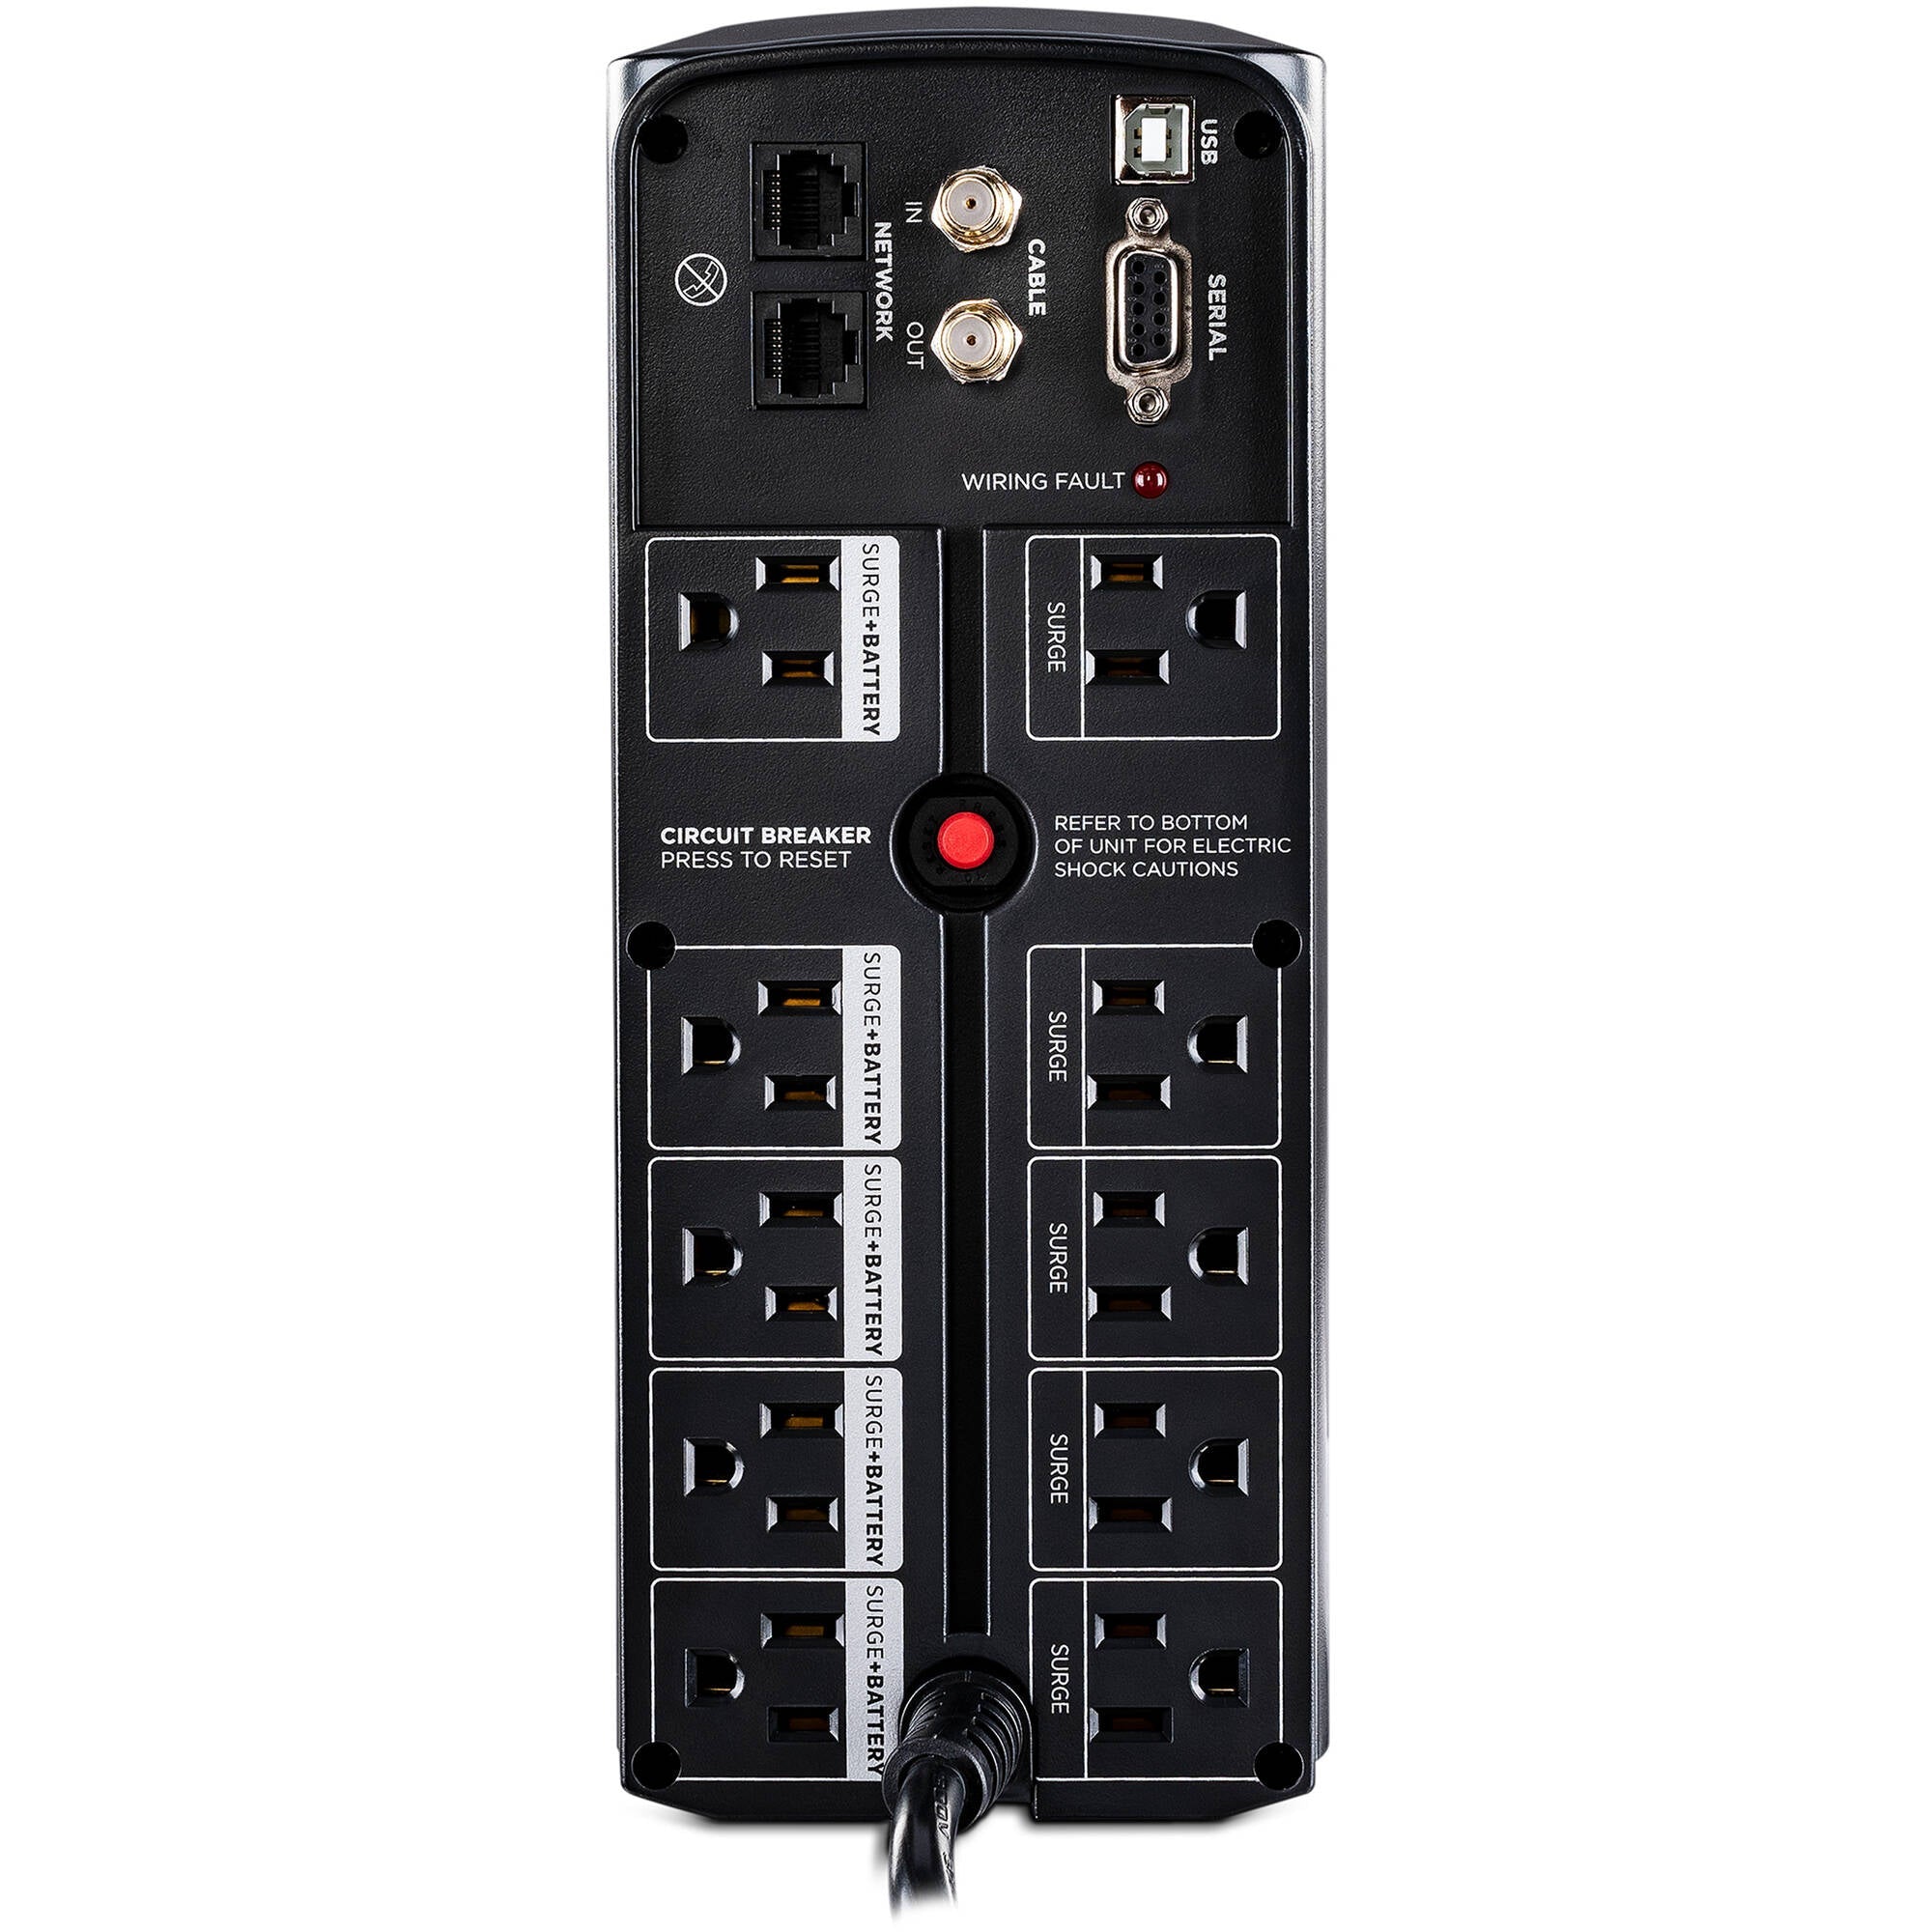 CyberPower CP900AVR-R CPS Tower AVR 900VA/560W 8 Outlets UPS - New Battery Certified Refurbished